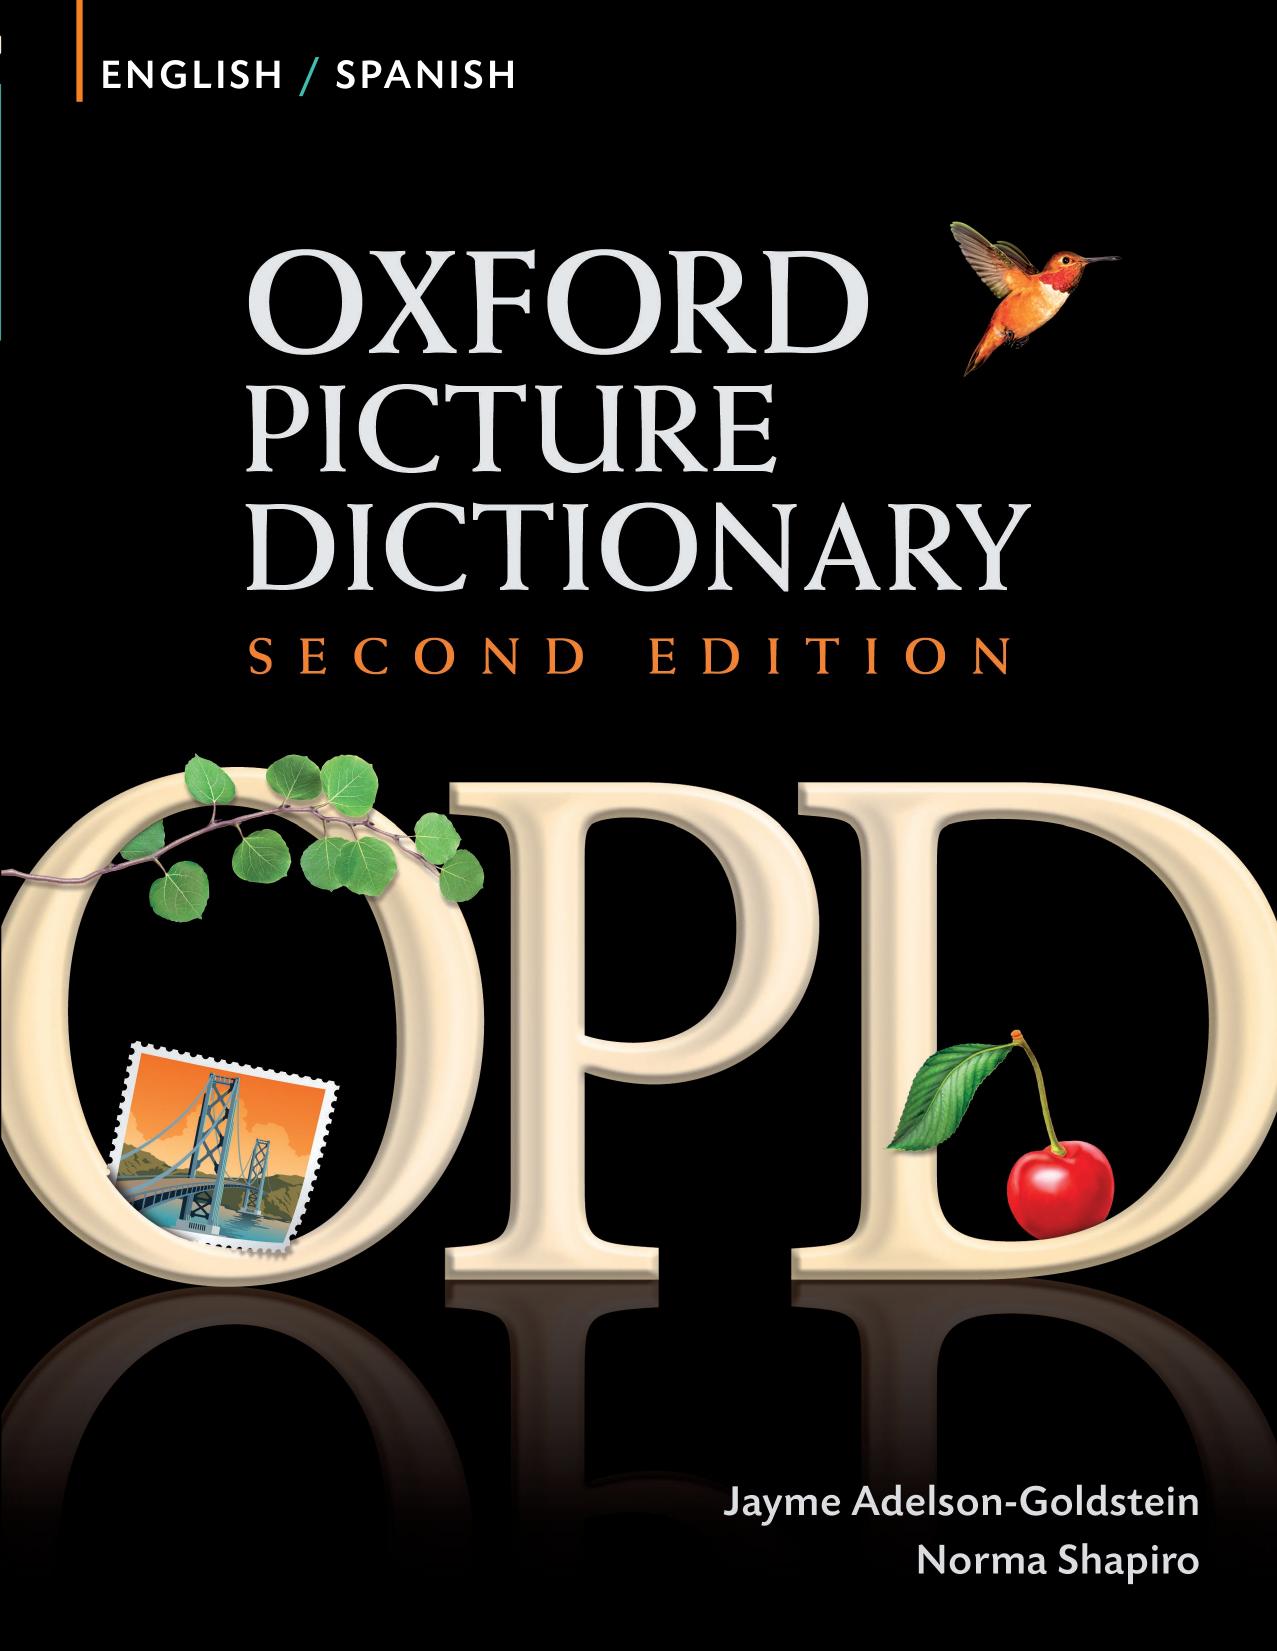 Oxford Picture Dictionary English-Spanish Edition: Bilingual Dictionary for Spanish-Speaking Teenage and Adult Students of English.